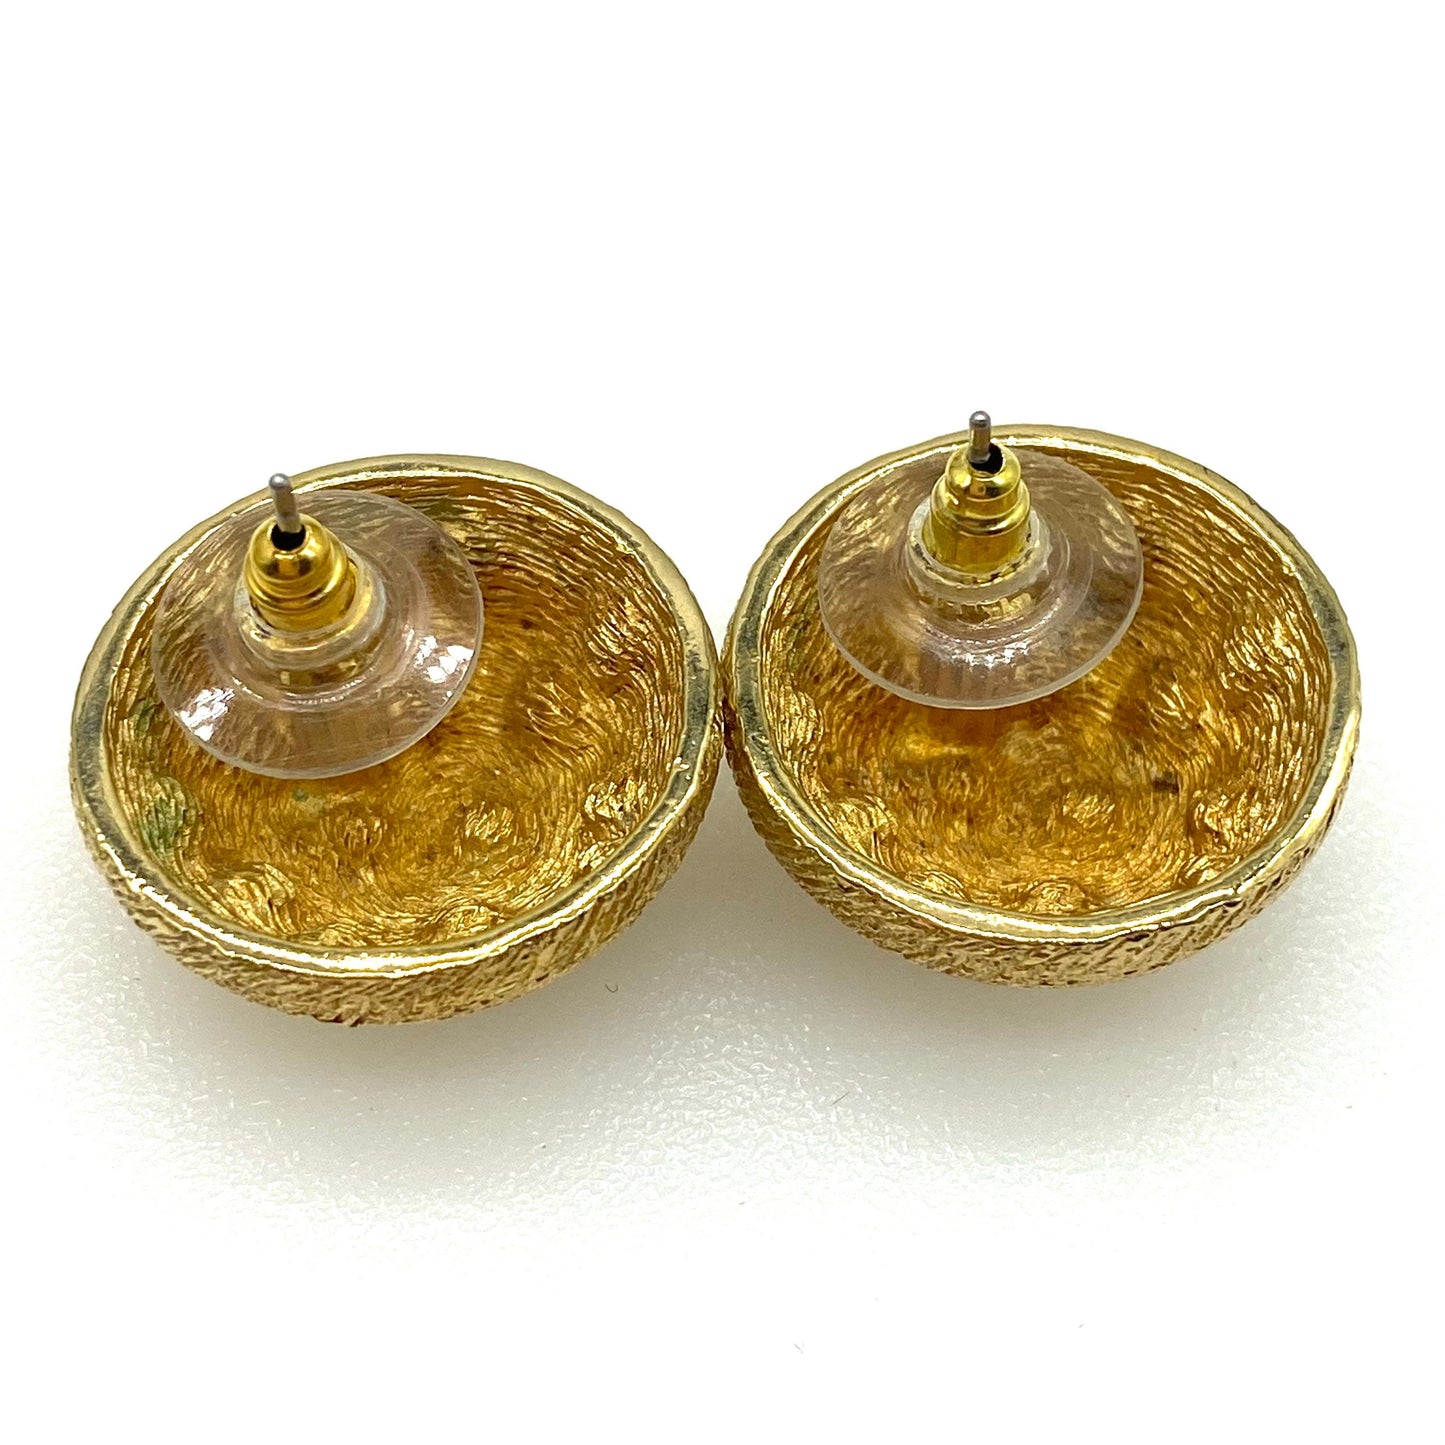 Christian Dior Pierced Gold Plated Dome Earrings With Swarovski Crystals and with Brand New Gold Plated Comfort Post Push Backs